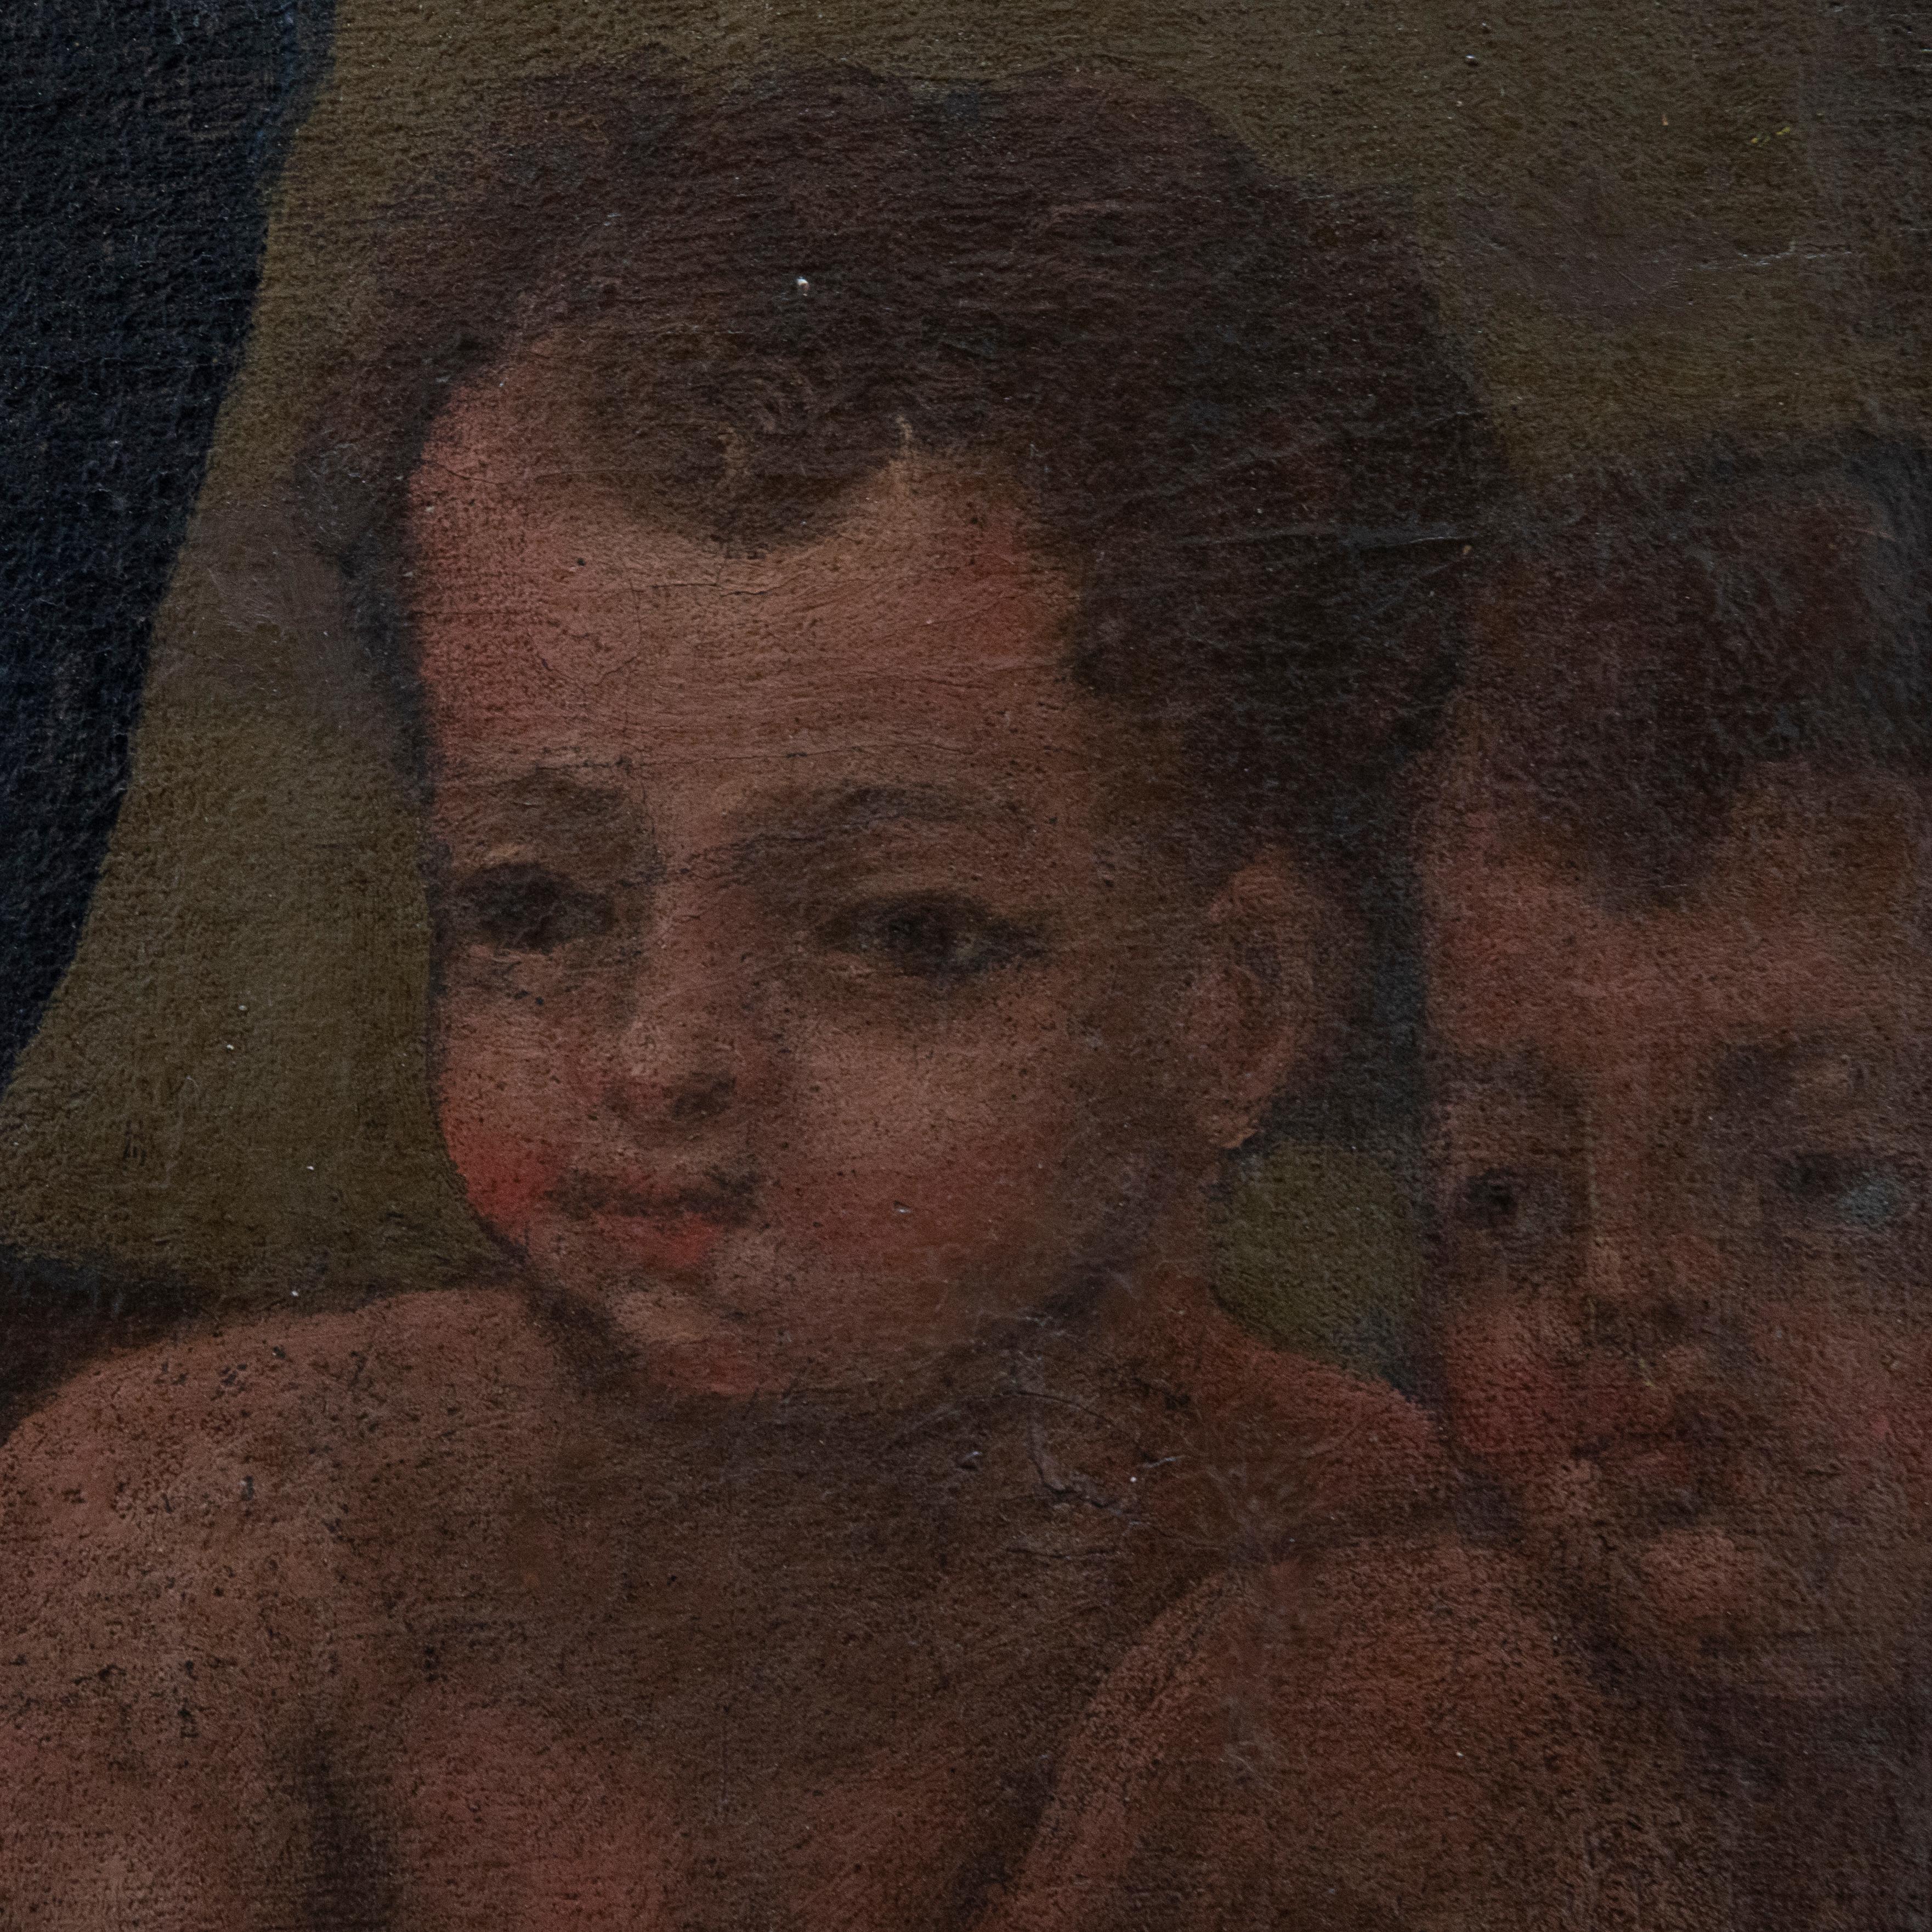 A fine 18th century classical scene in oil, depicting two putti wrapped in a diaphanous piece of cloth. Undoubtedly part of a larger scene, this may be a study from an altarpiece or fresco. Well presented in a 19th century gilt slip, with a fine